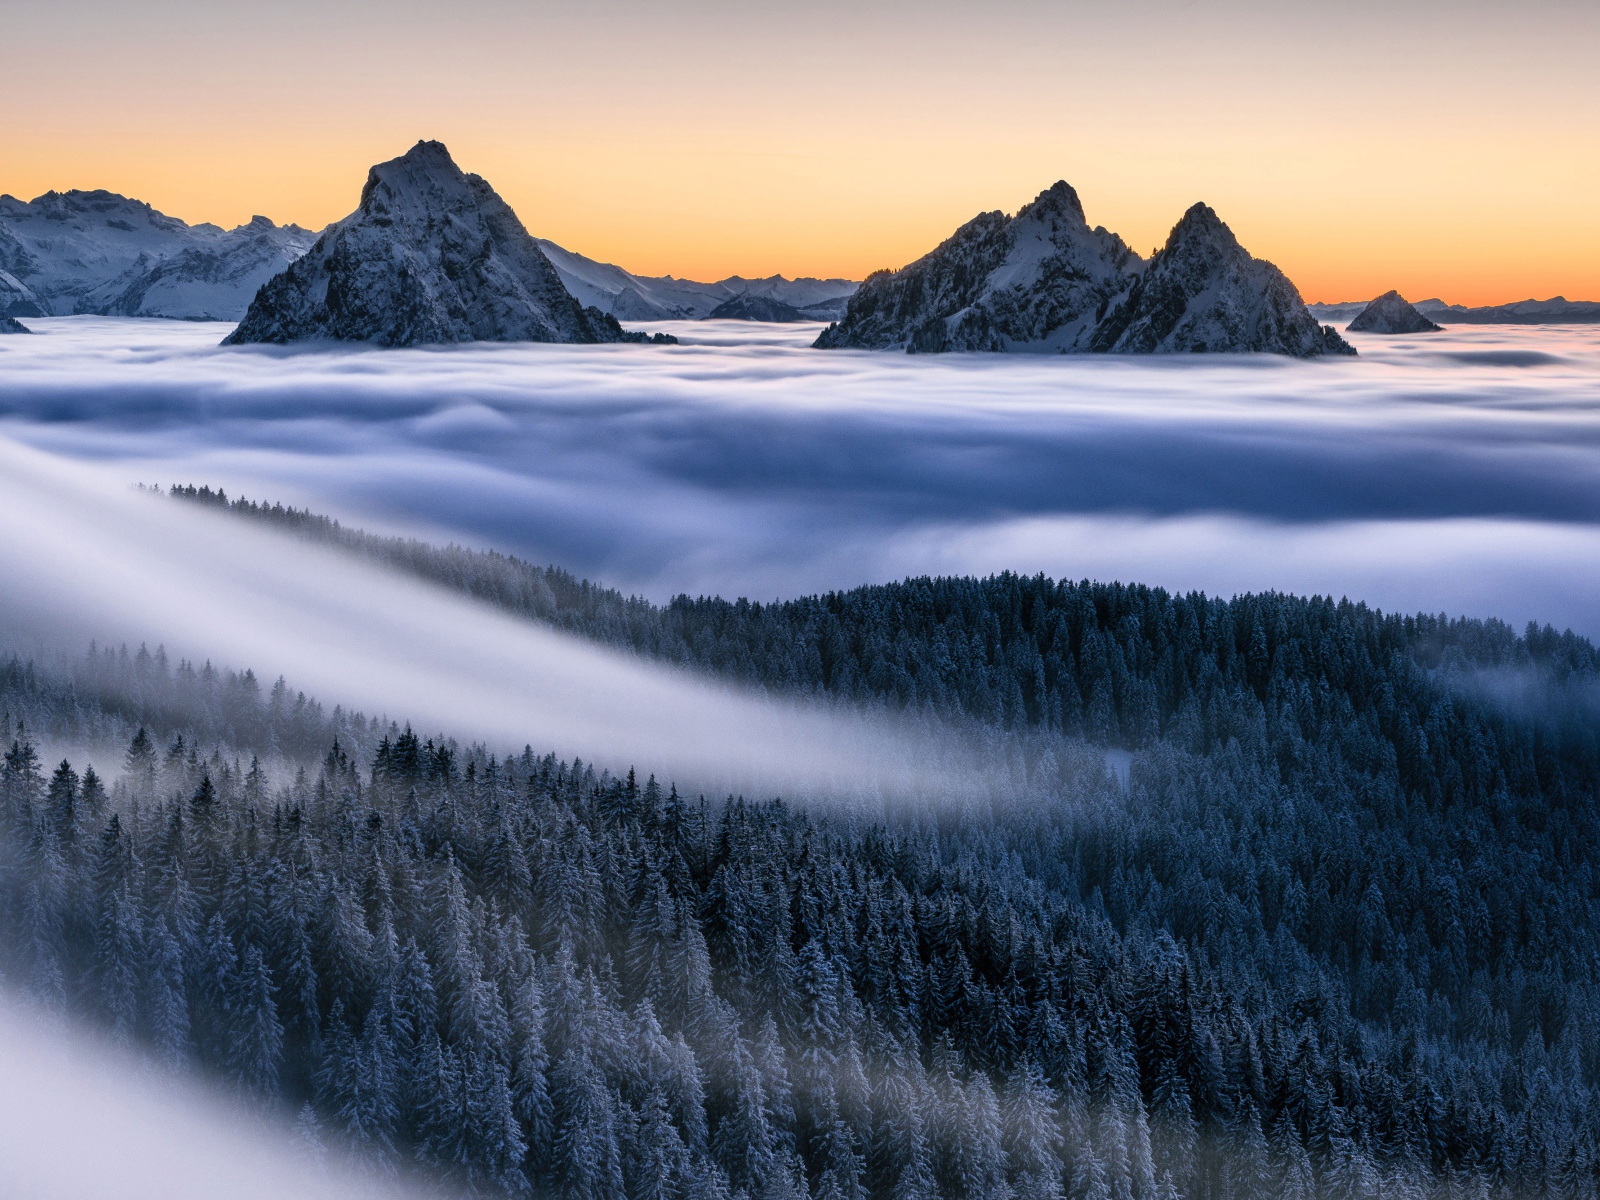 Fog covers the forest and snow-covered tops of mountains